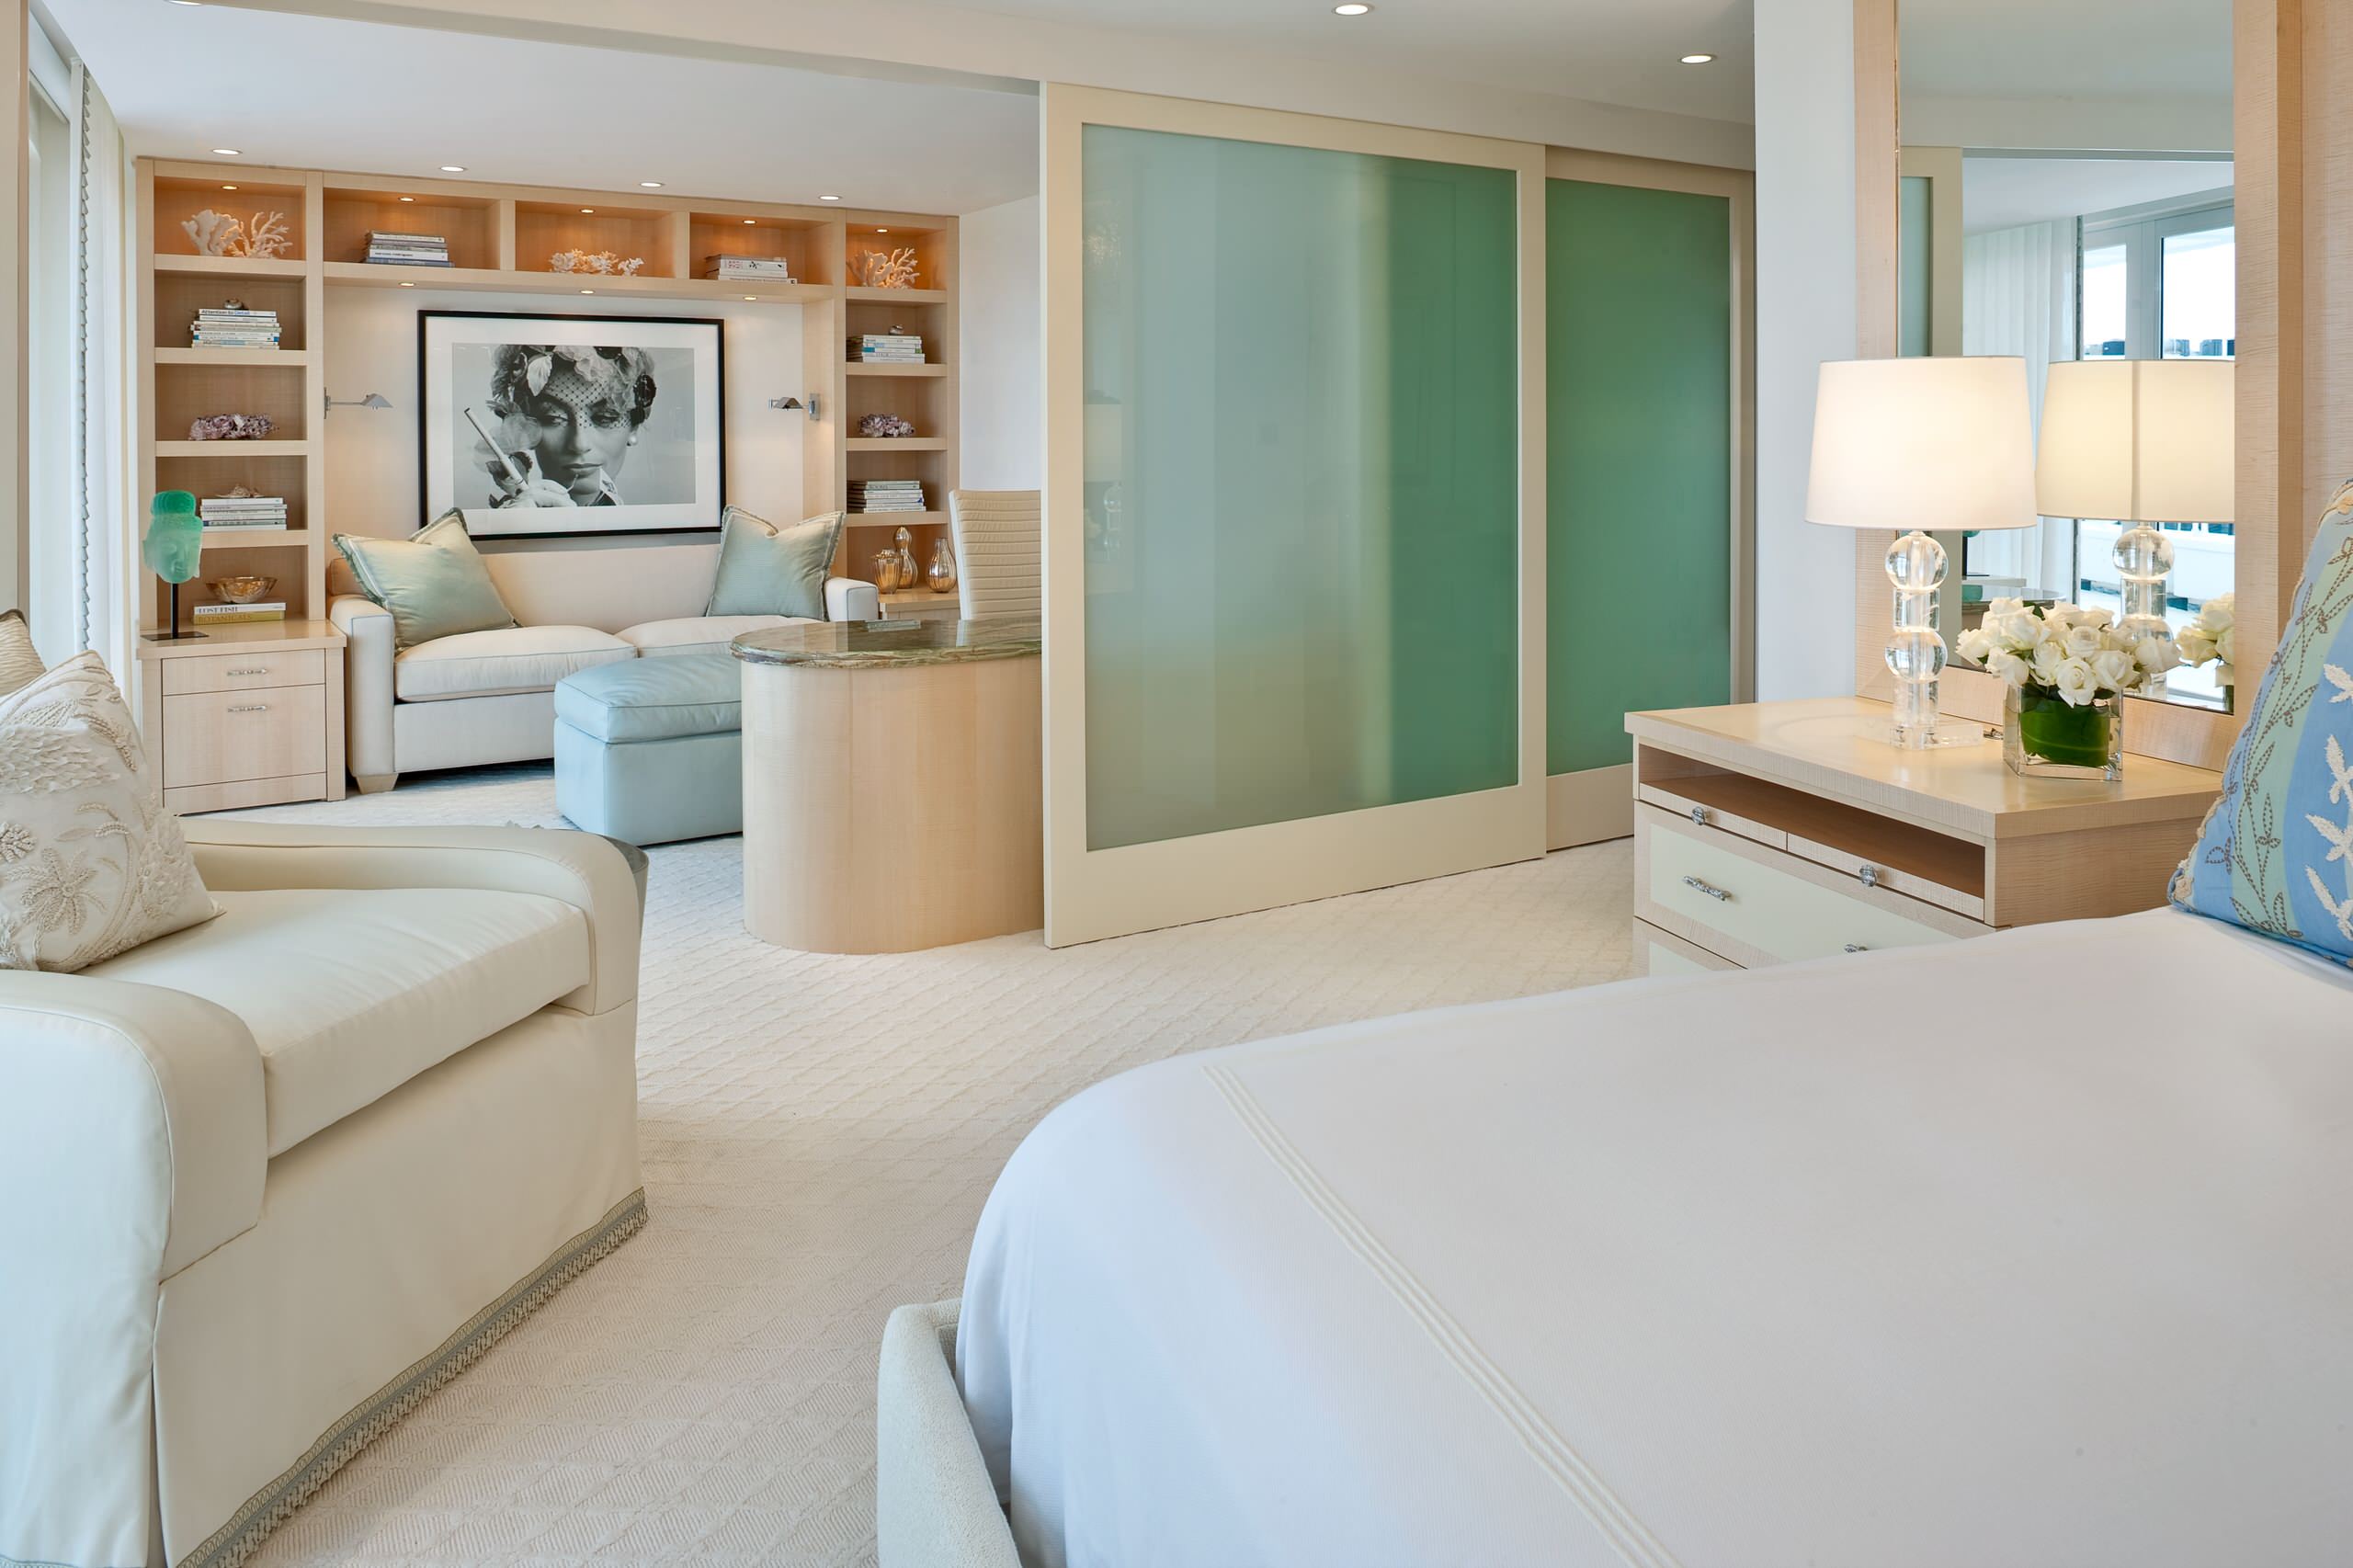 Master Bedroom Sitting Area Houzz, How To Decorate Master Bedroom With Sitting Area Ideas